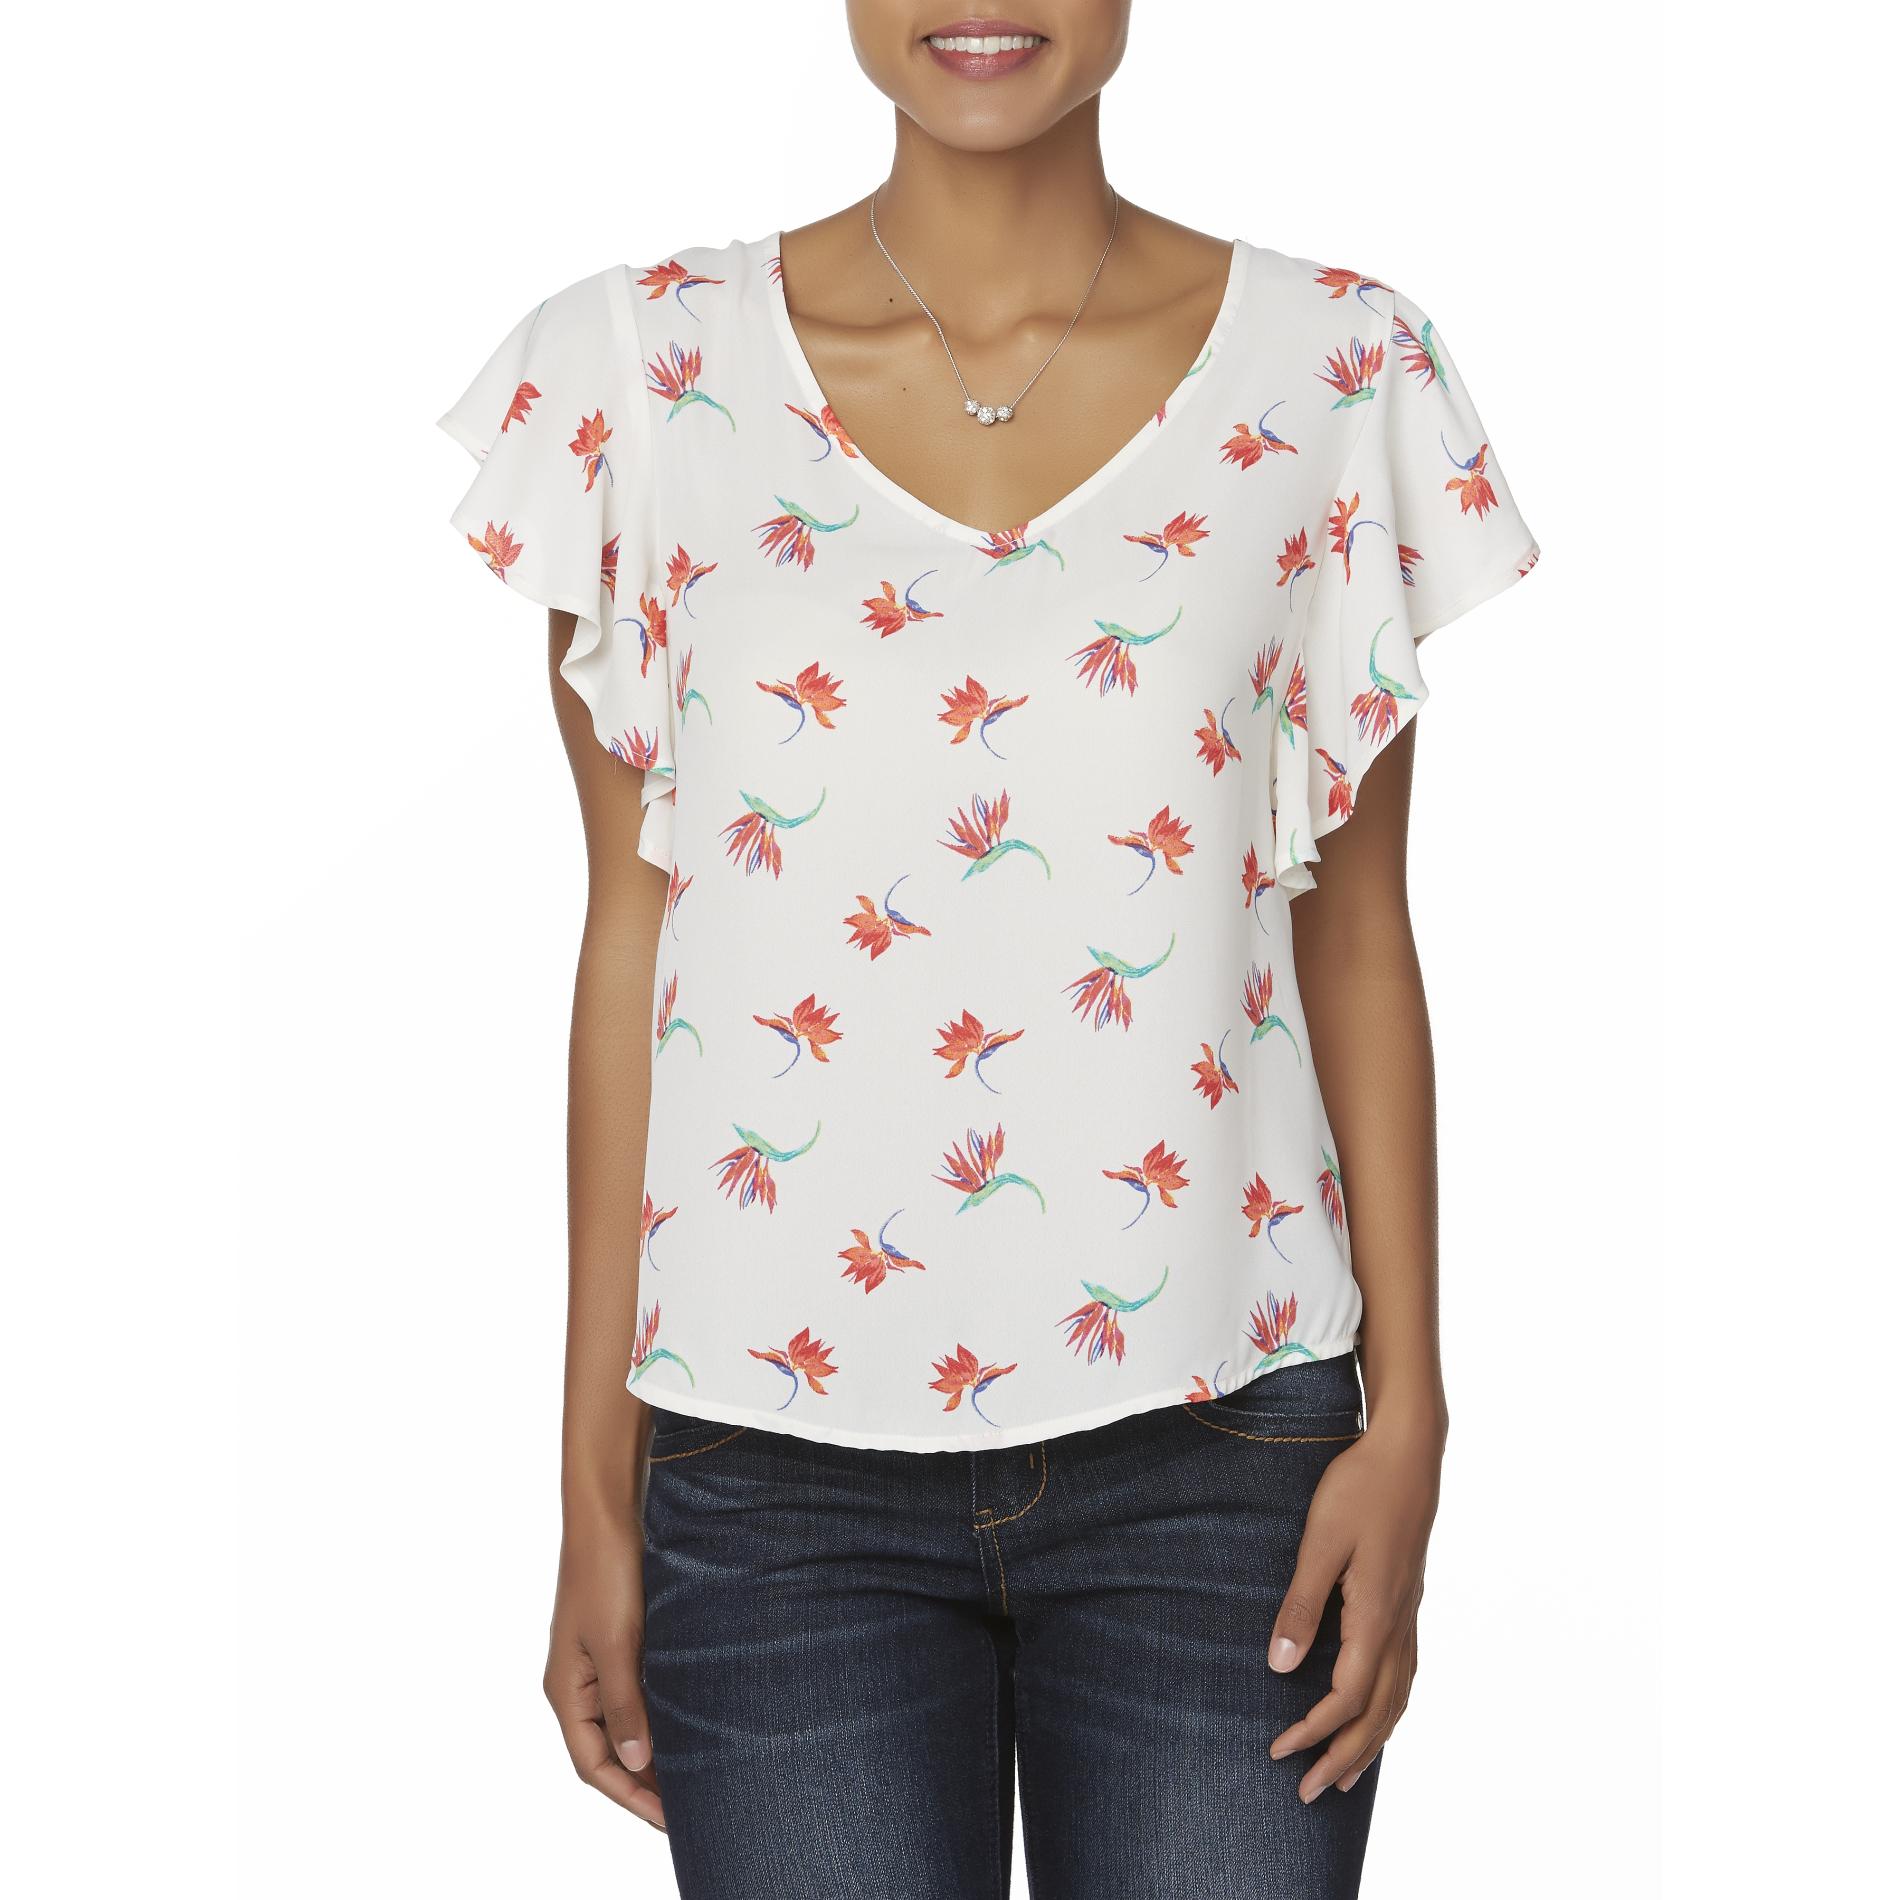 Simply Styled Women's Flutter Sleeve Top - Floral